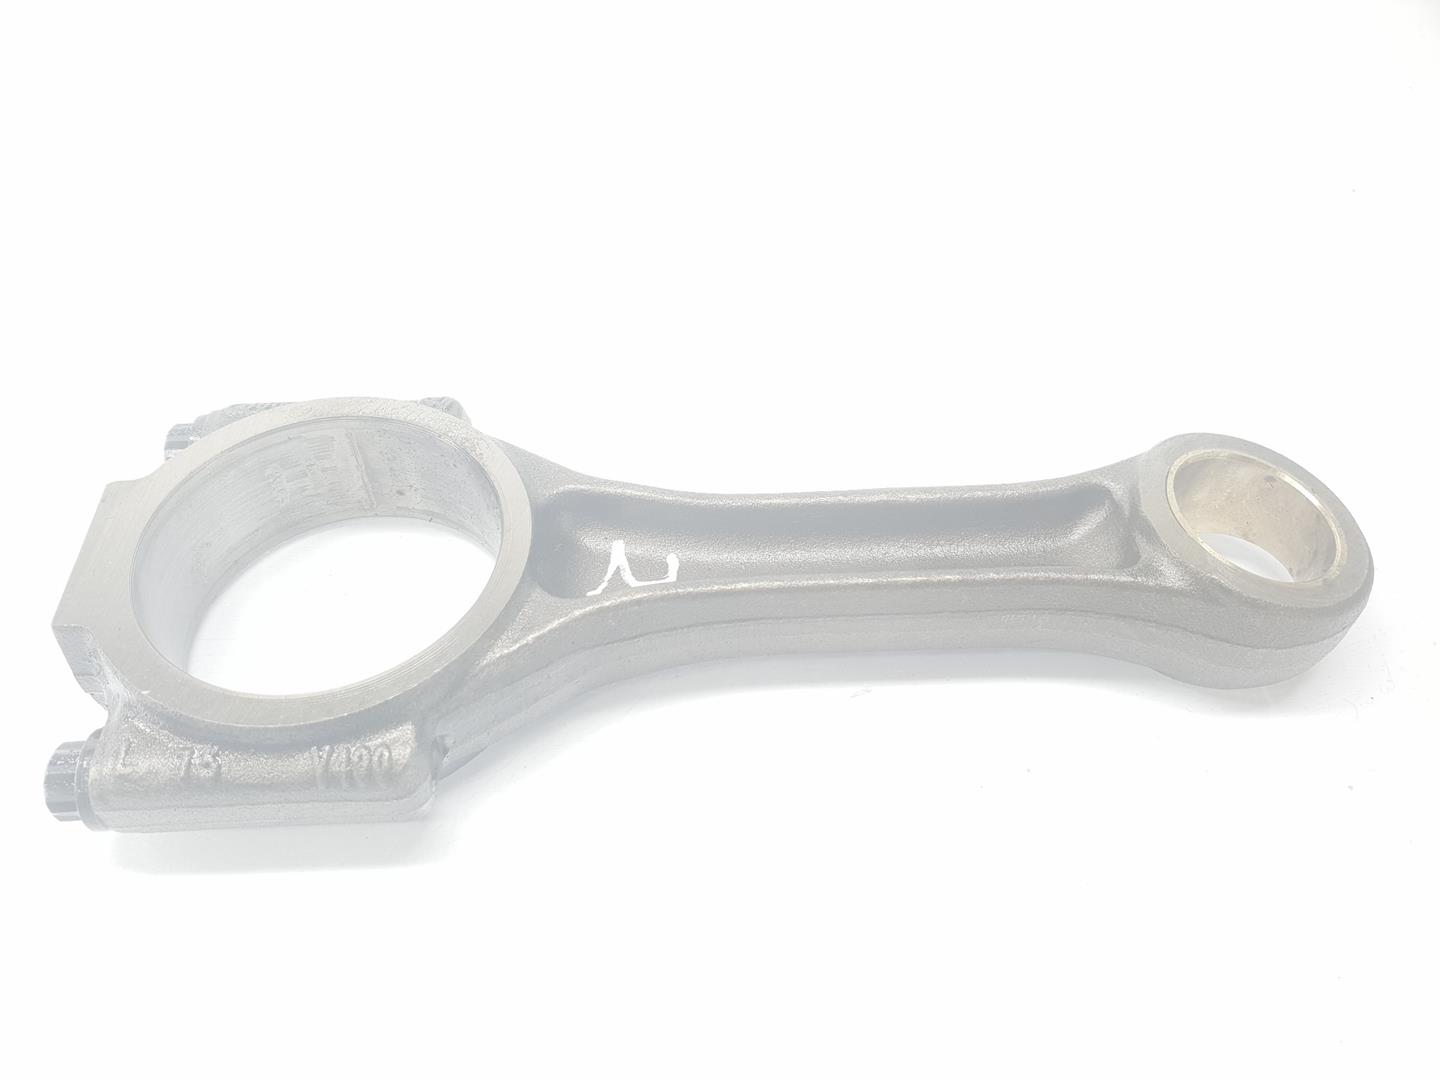 SEAT Exeo 1 generation (2009-2012) Connecting Rod 038198401F, 038198401F, 1111AA 22601992